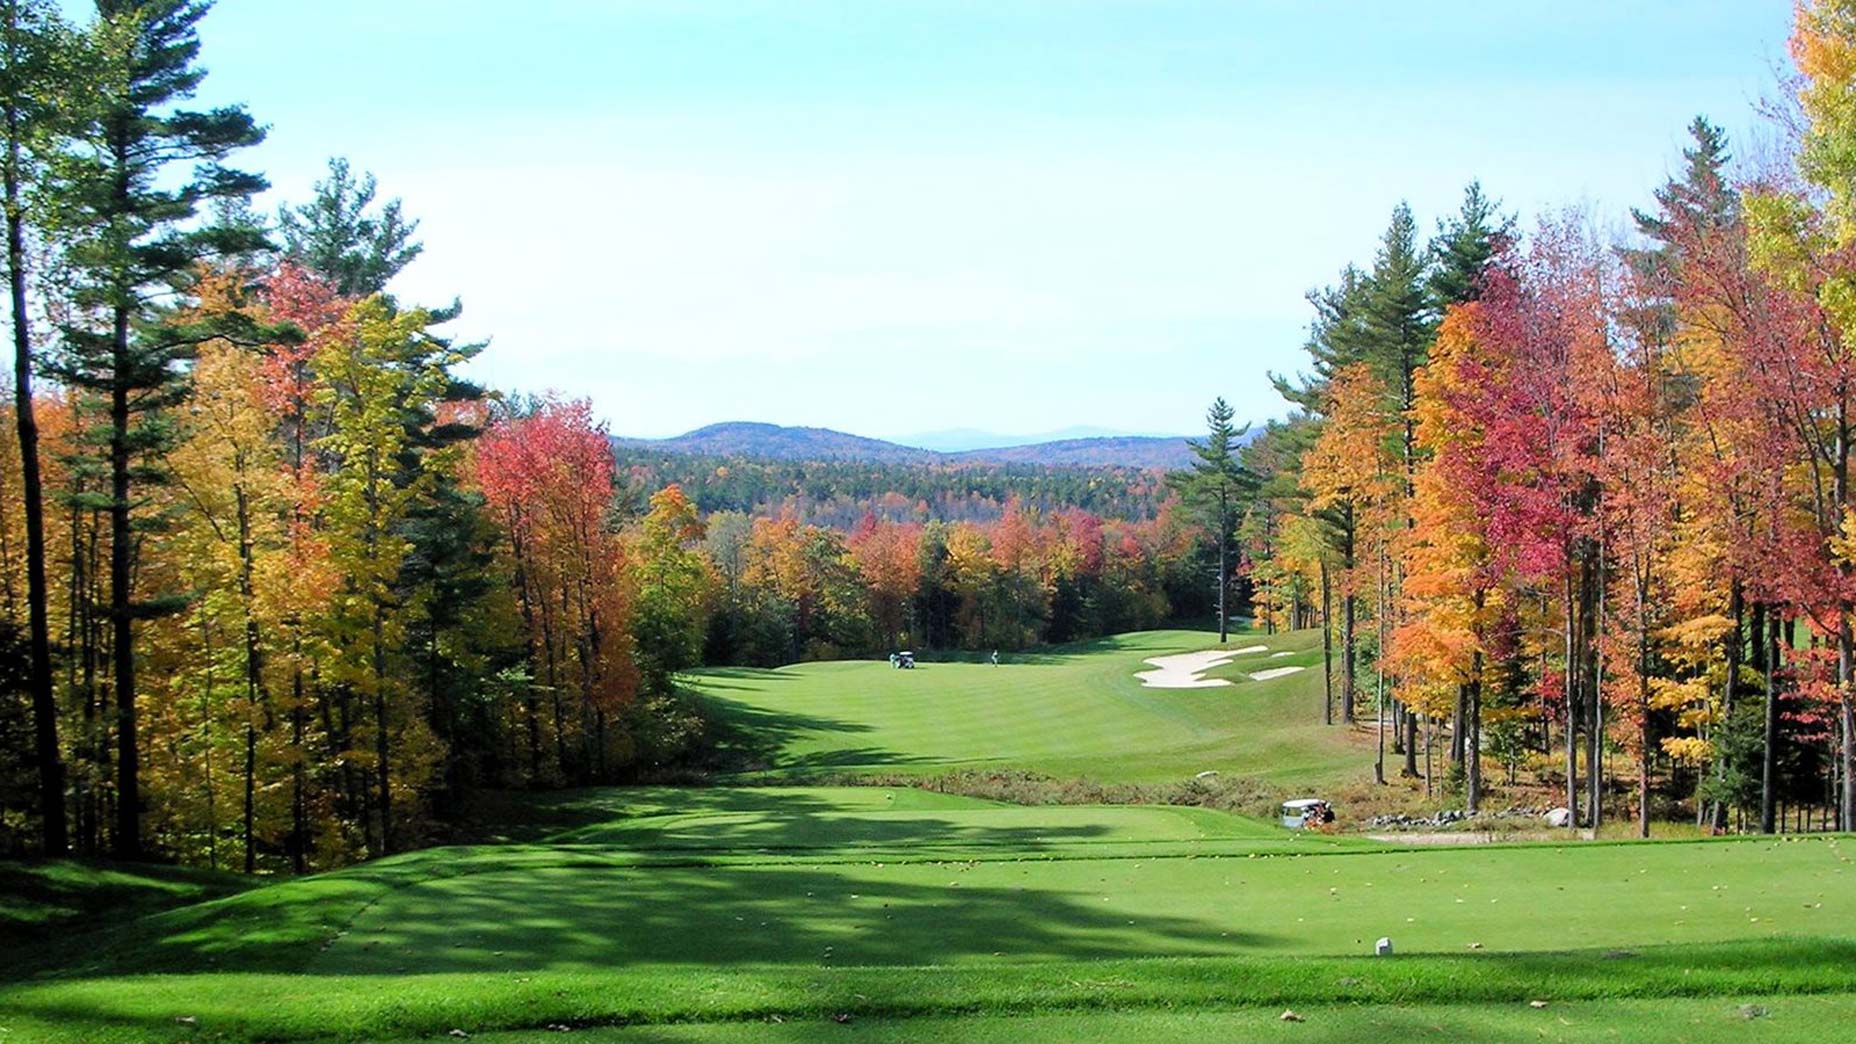 Best Golf Courses In New Hampshire, According To GOLF Magazine's Raters